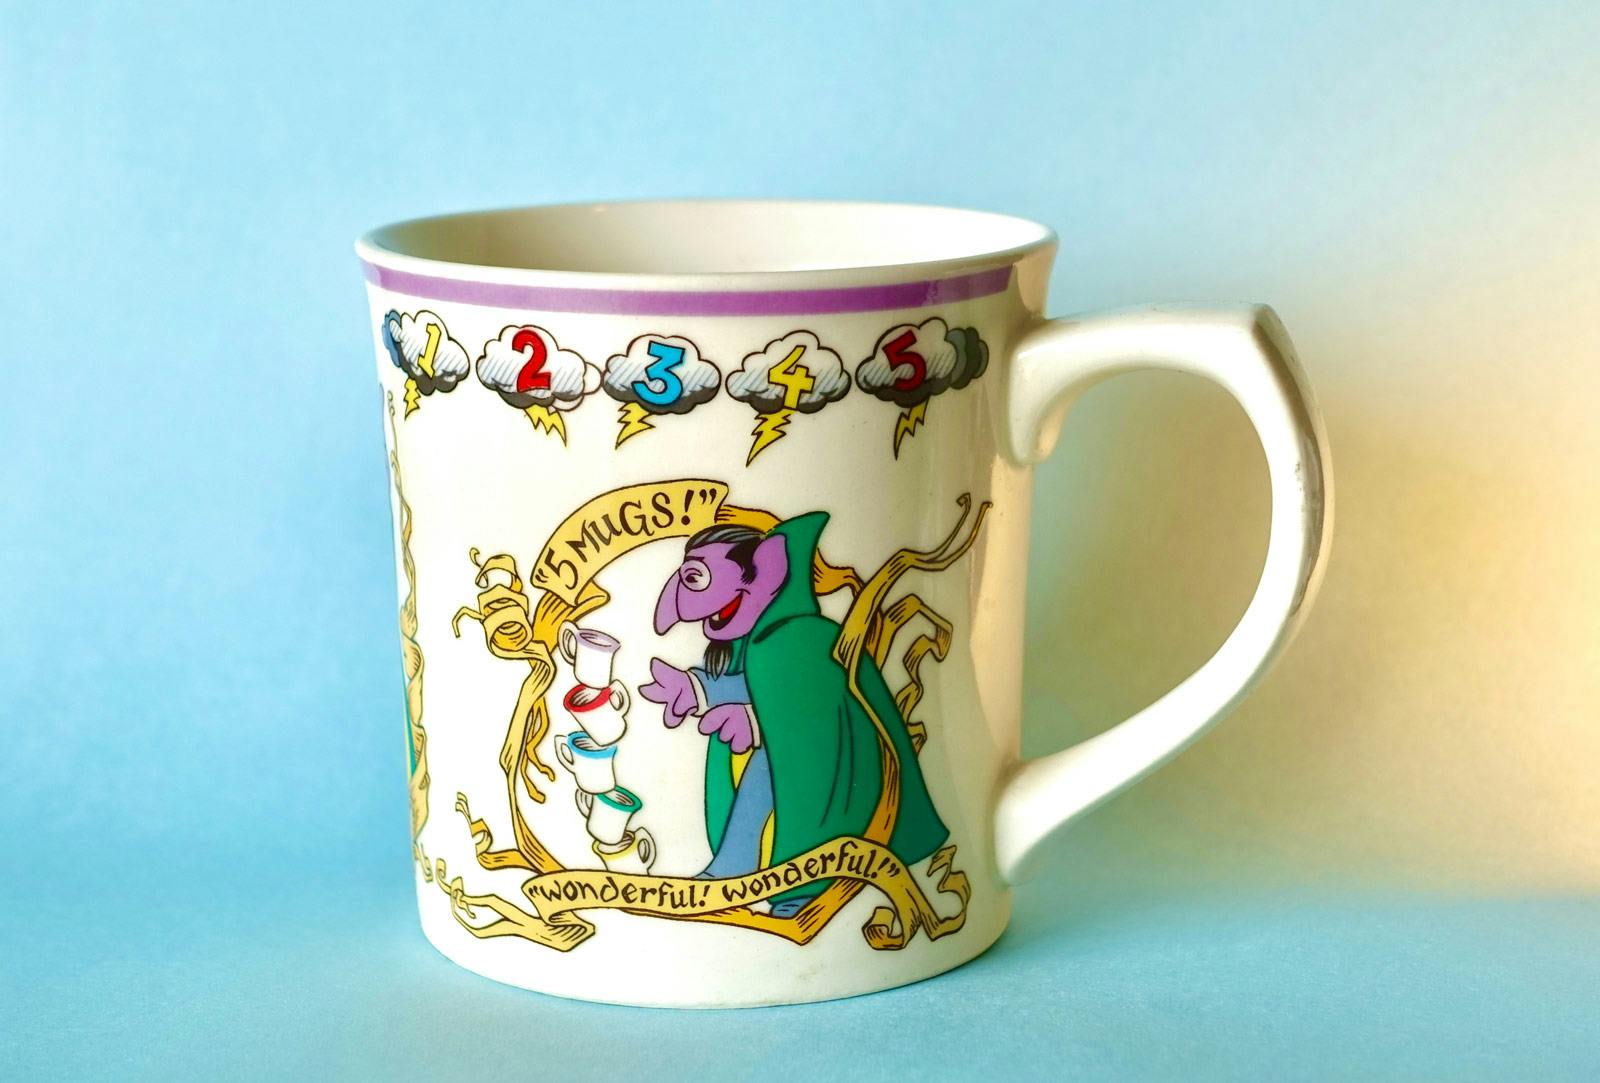 1970s vintage Sesame Street coffee mug featuring The Count